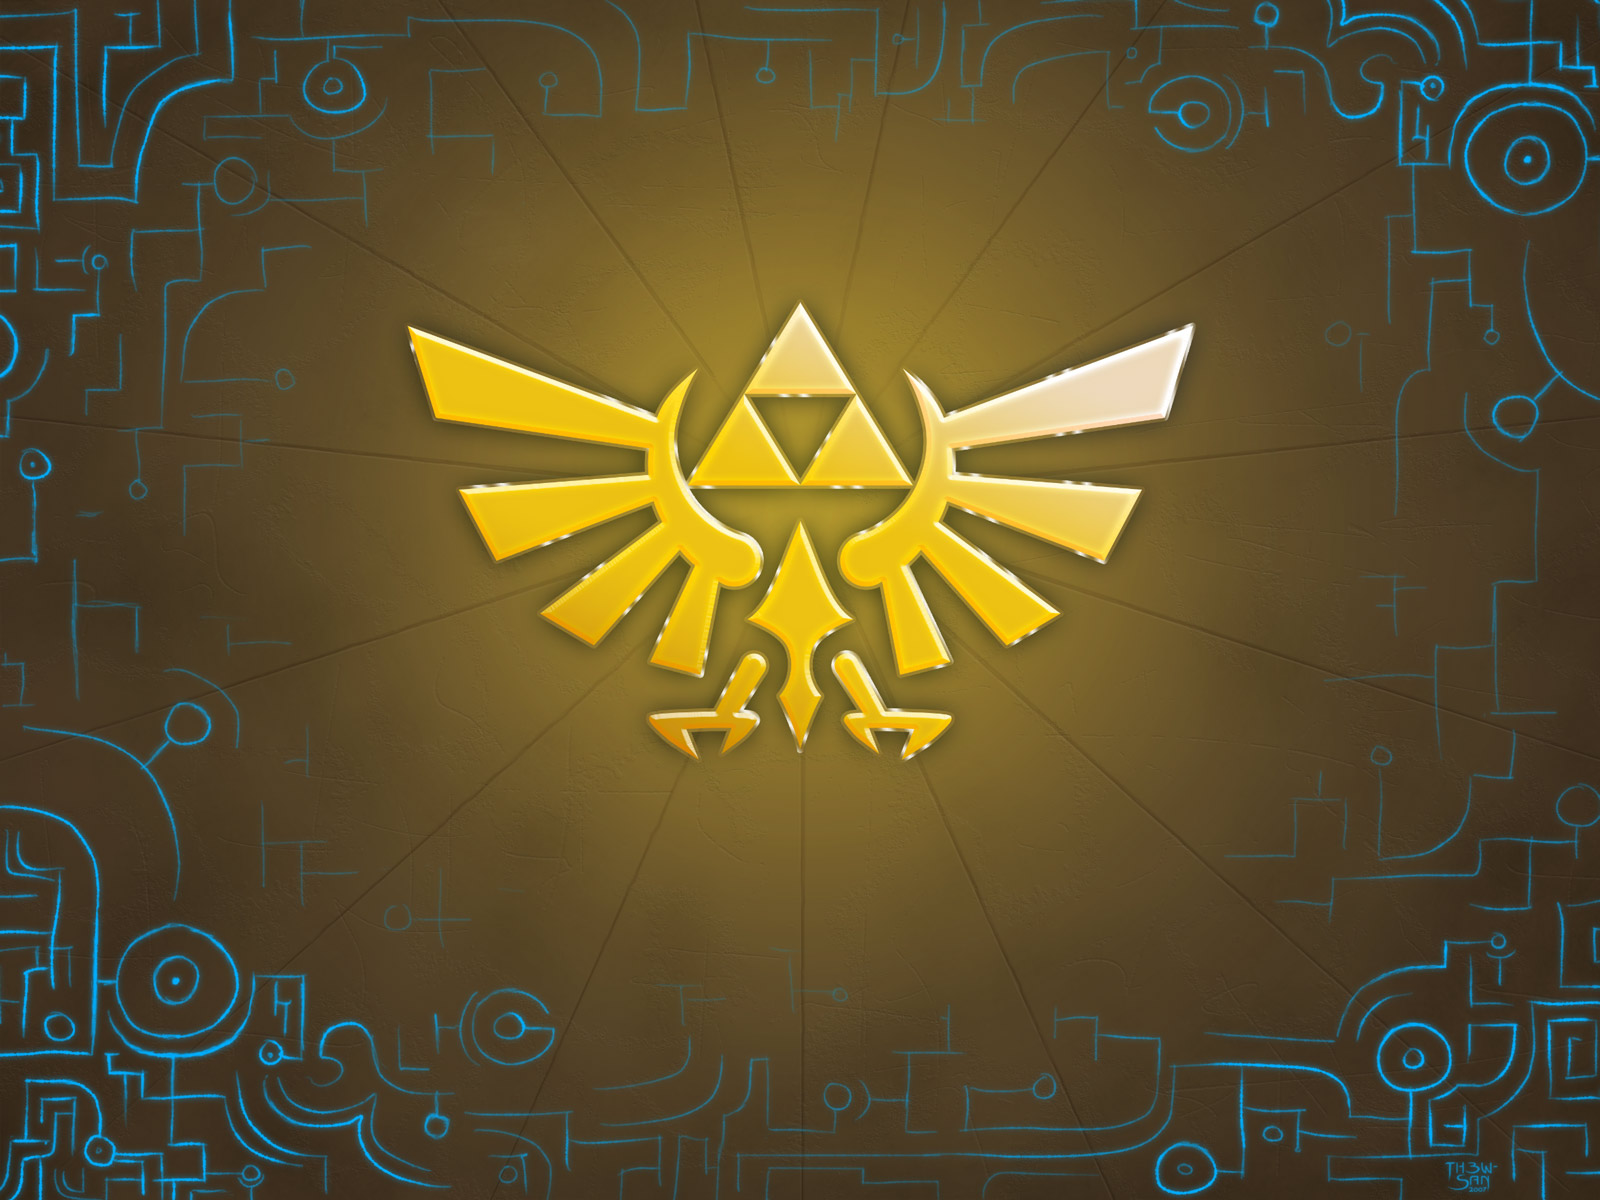 zelda triforce video game wallpaper share this video game background